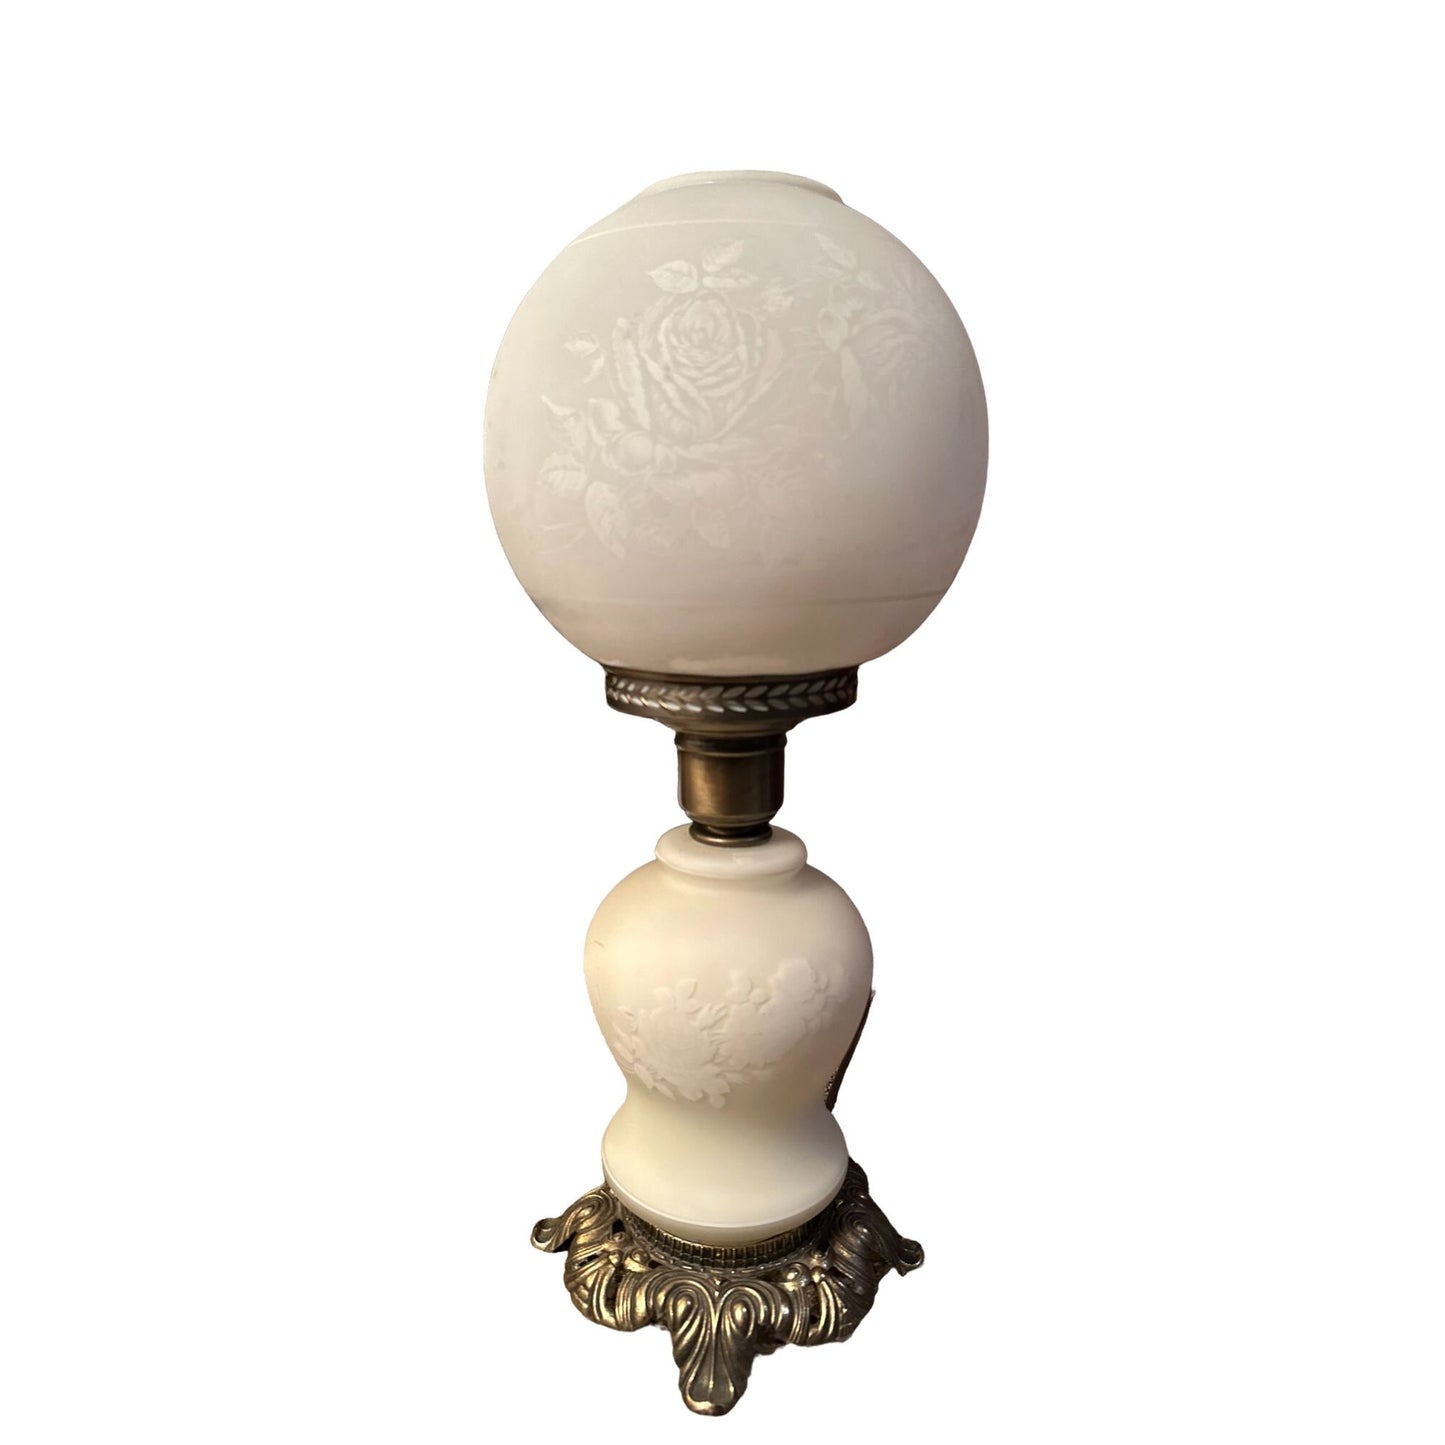 Vintage Double Globe Milk Glass Gone with the Wind Footed Table Lamp Light